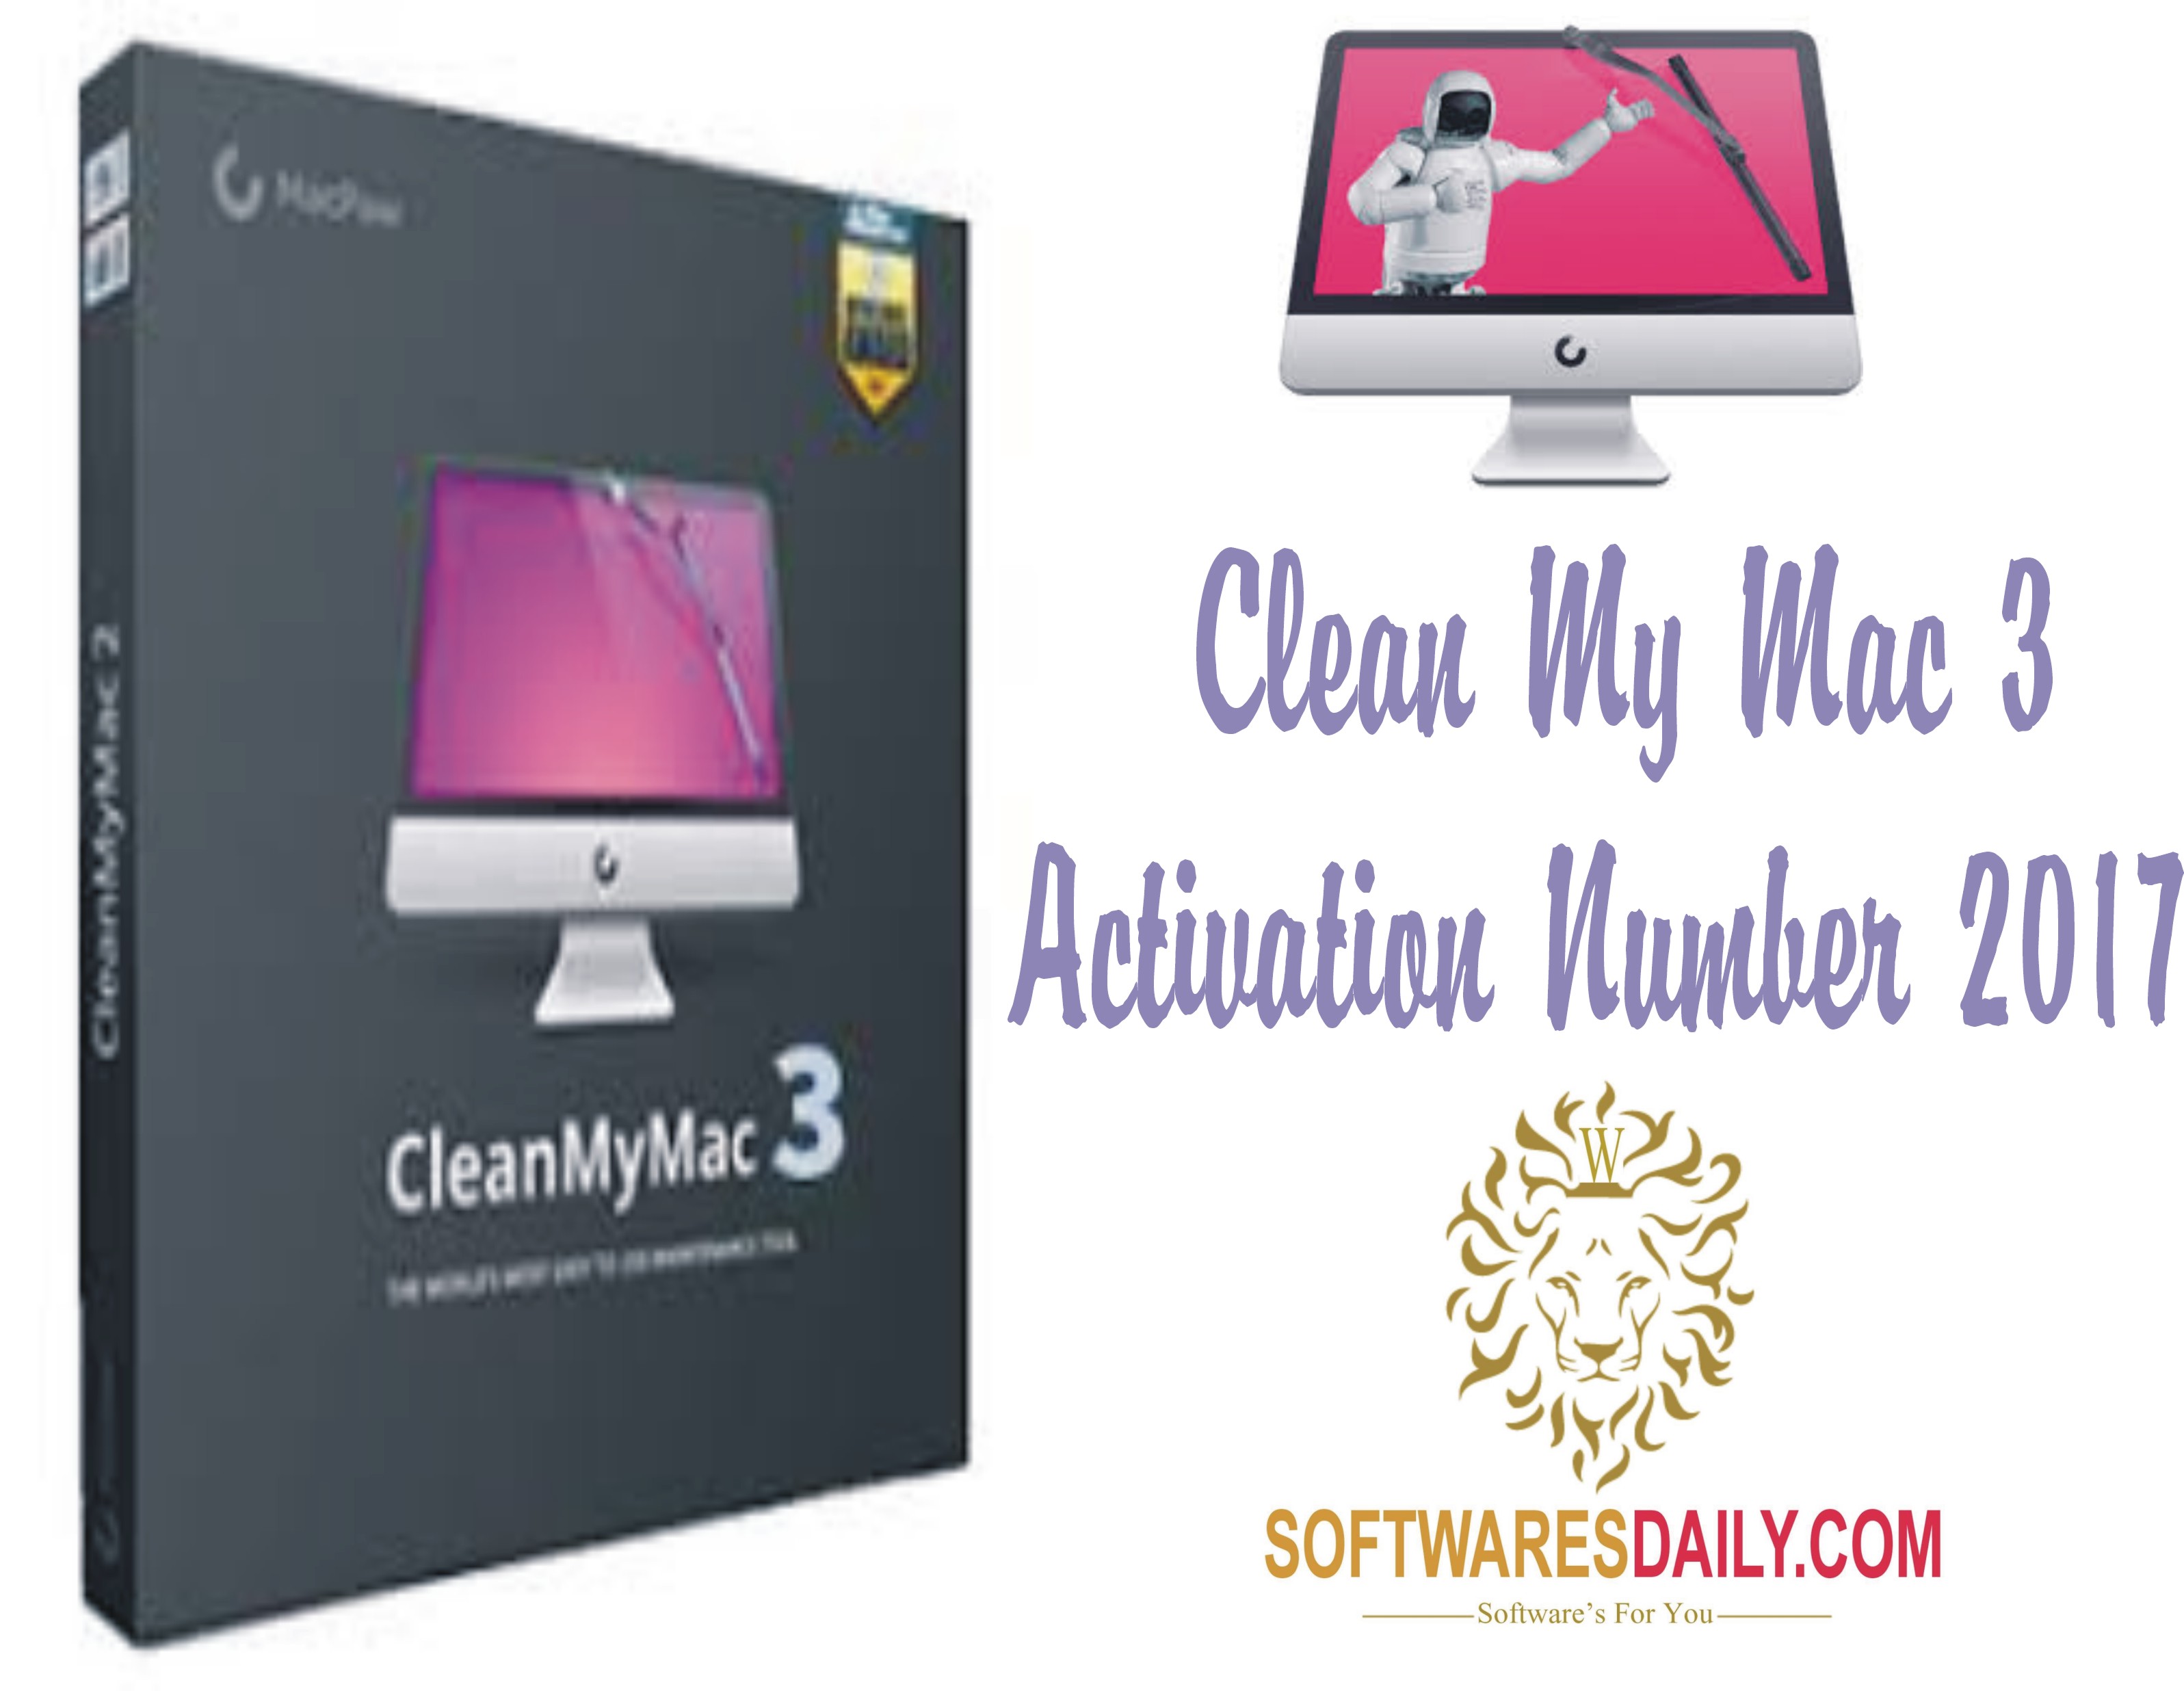 will there be a cleanmymac 4